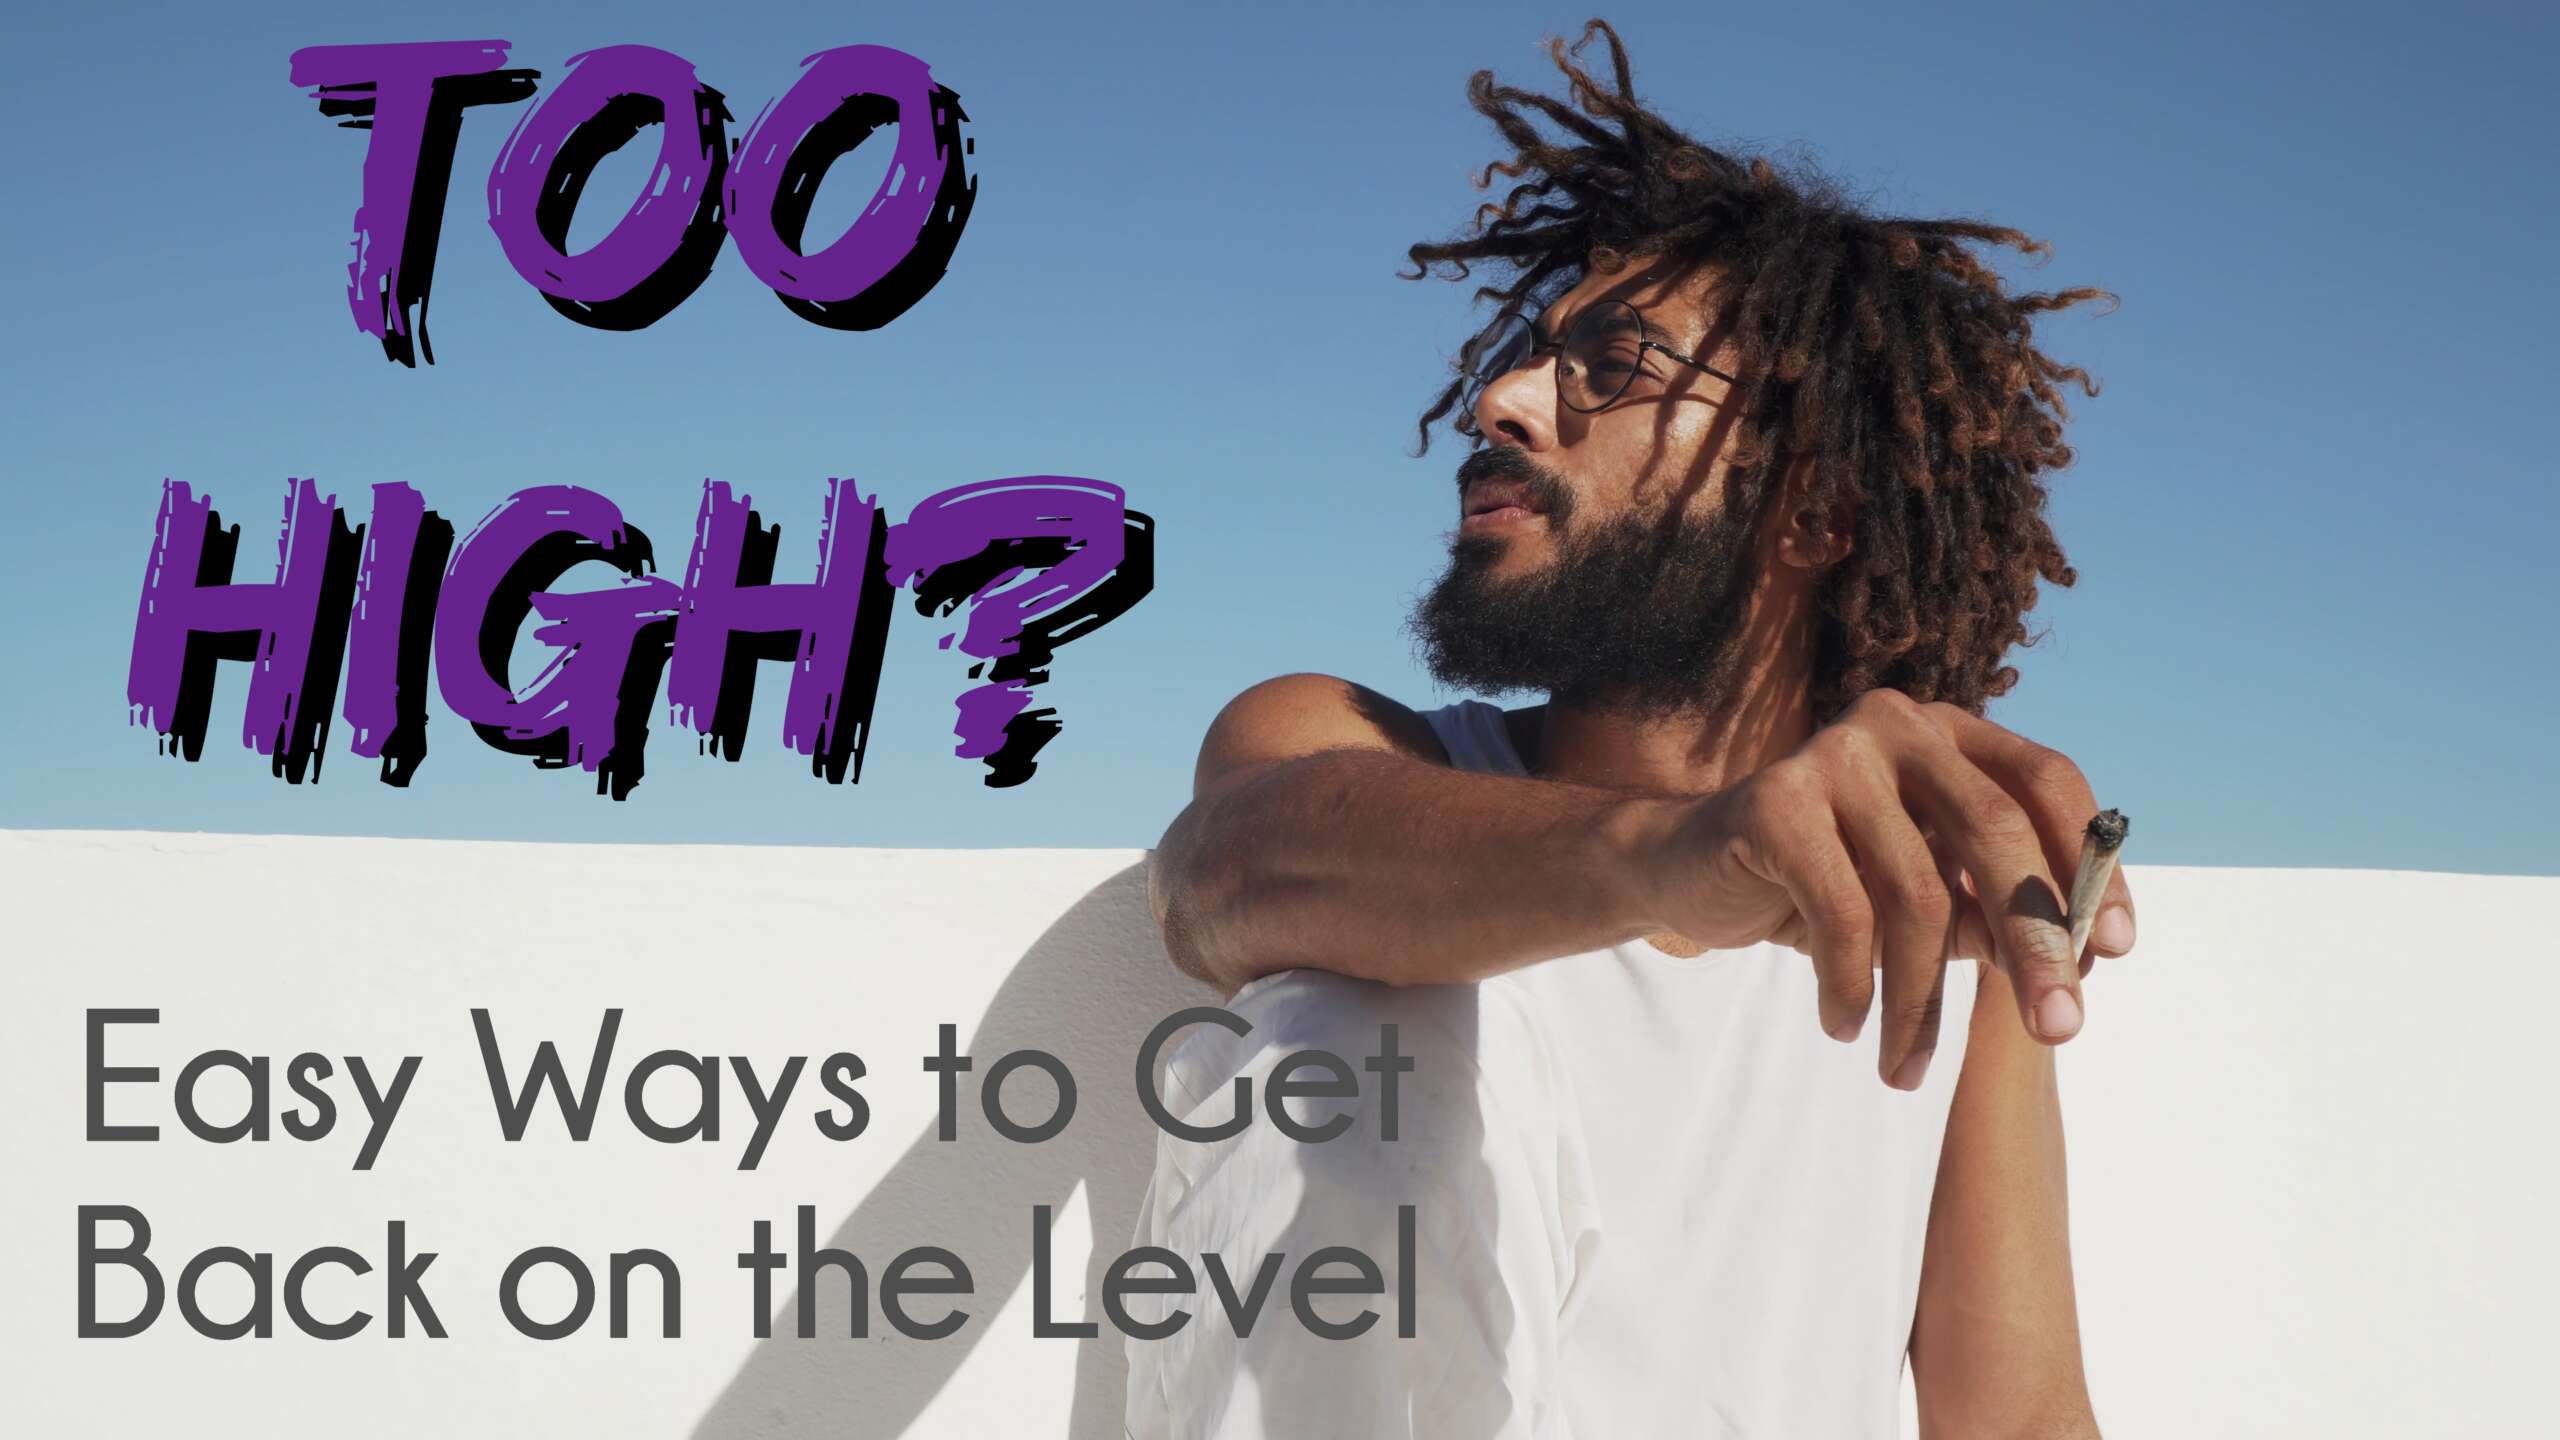 Too High?: Easy Ways to Get Back on the Level